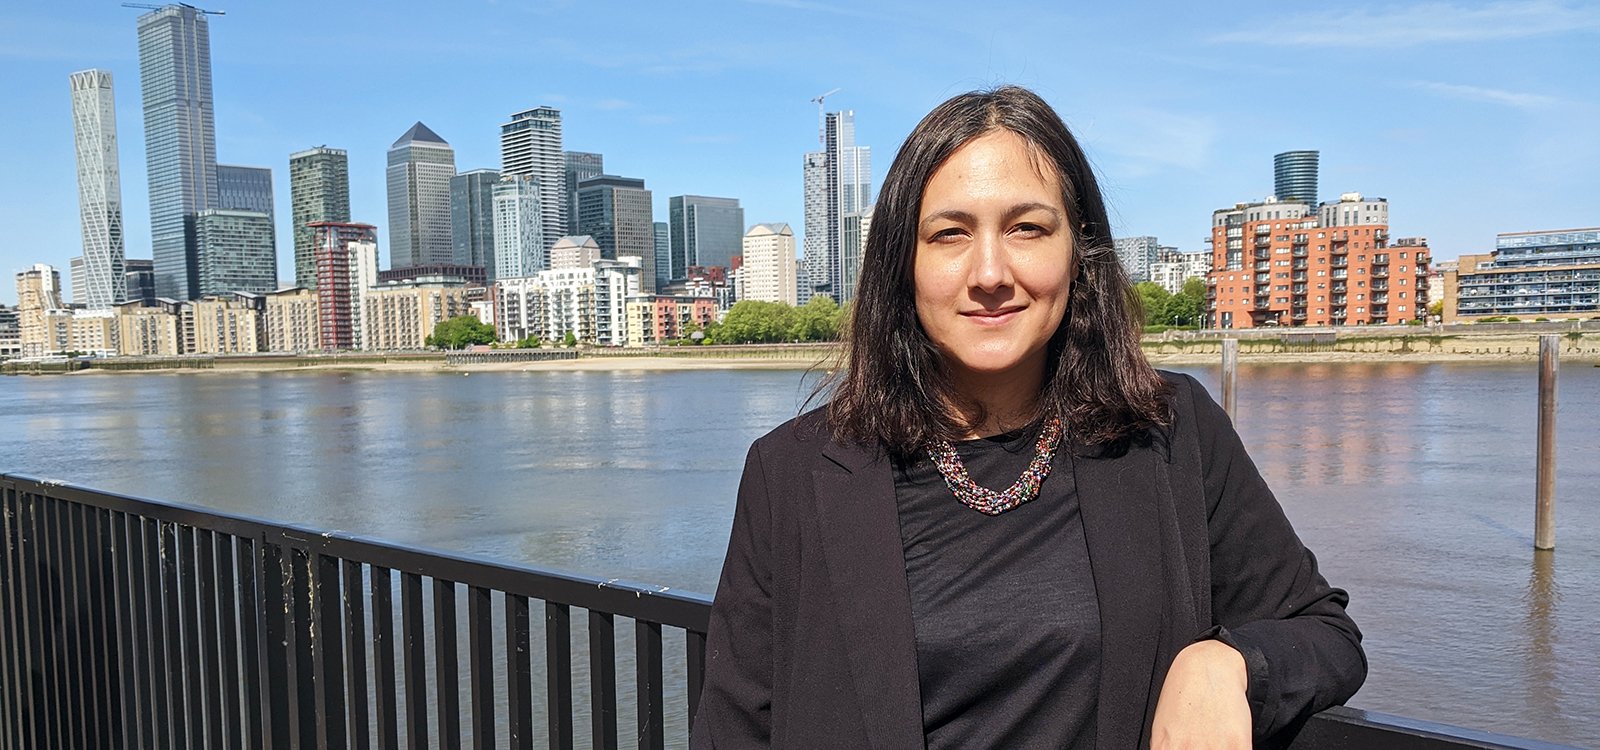 <p>Senior programme officer Verónica Martinez at the Innovation for Cleaner, Safer Vehicles is on a mission to drive sustainable change across the mining industry.</p>
